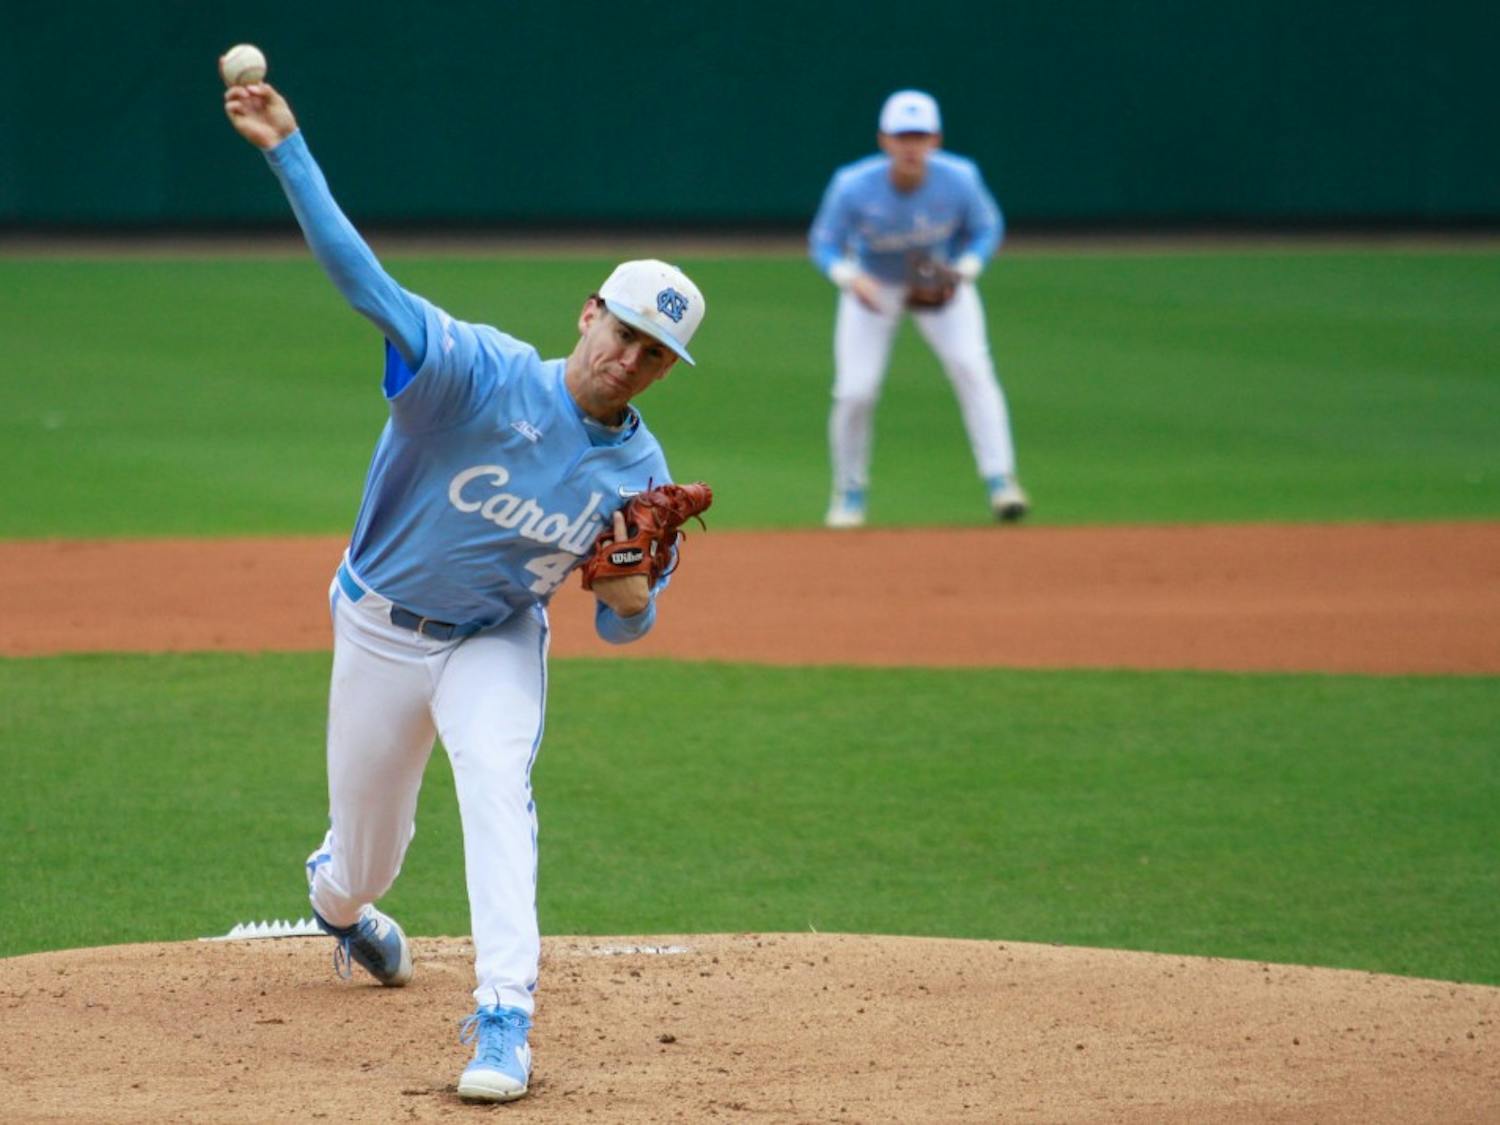 UNC pitcher junior Austin Bergner (45) throws a pitch for the Tar Heels against UMass Lowell Sunday, March 3, 2019 at Boshamer Stadium.